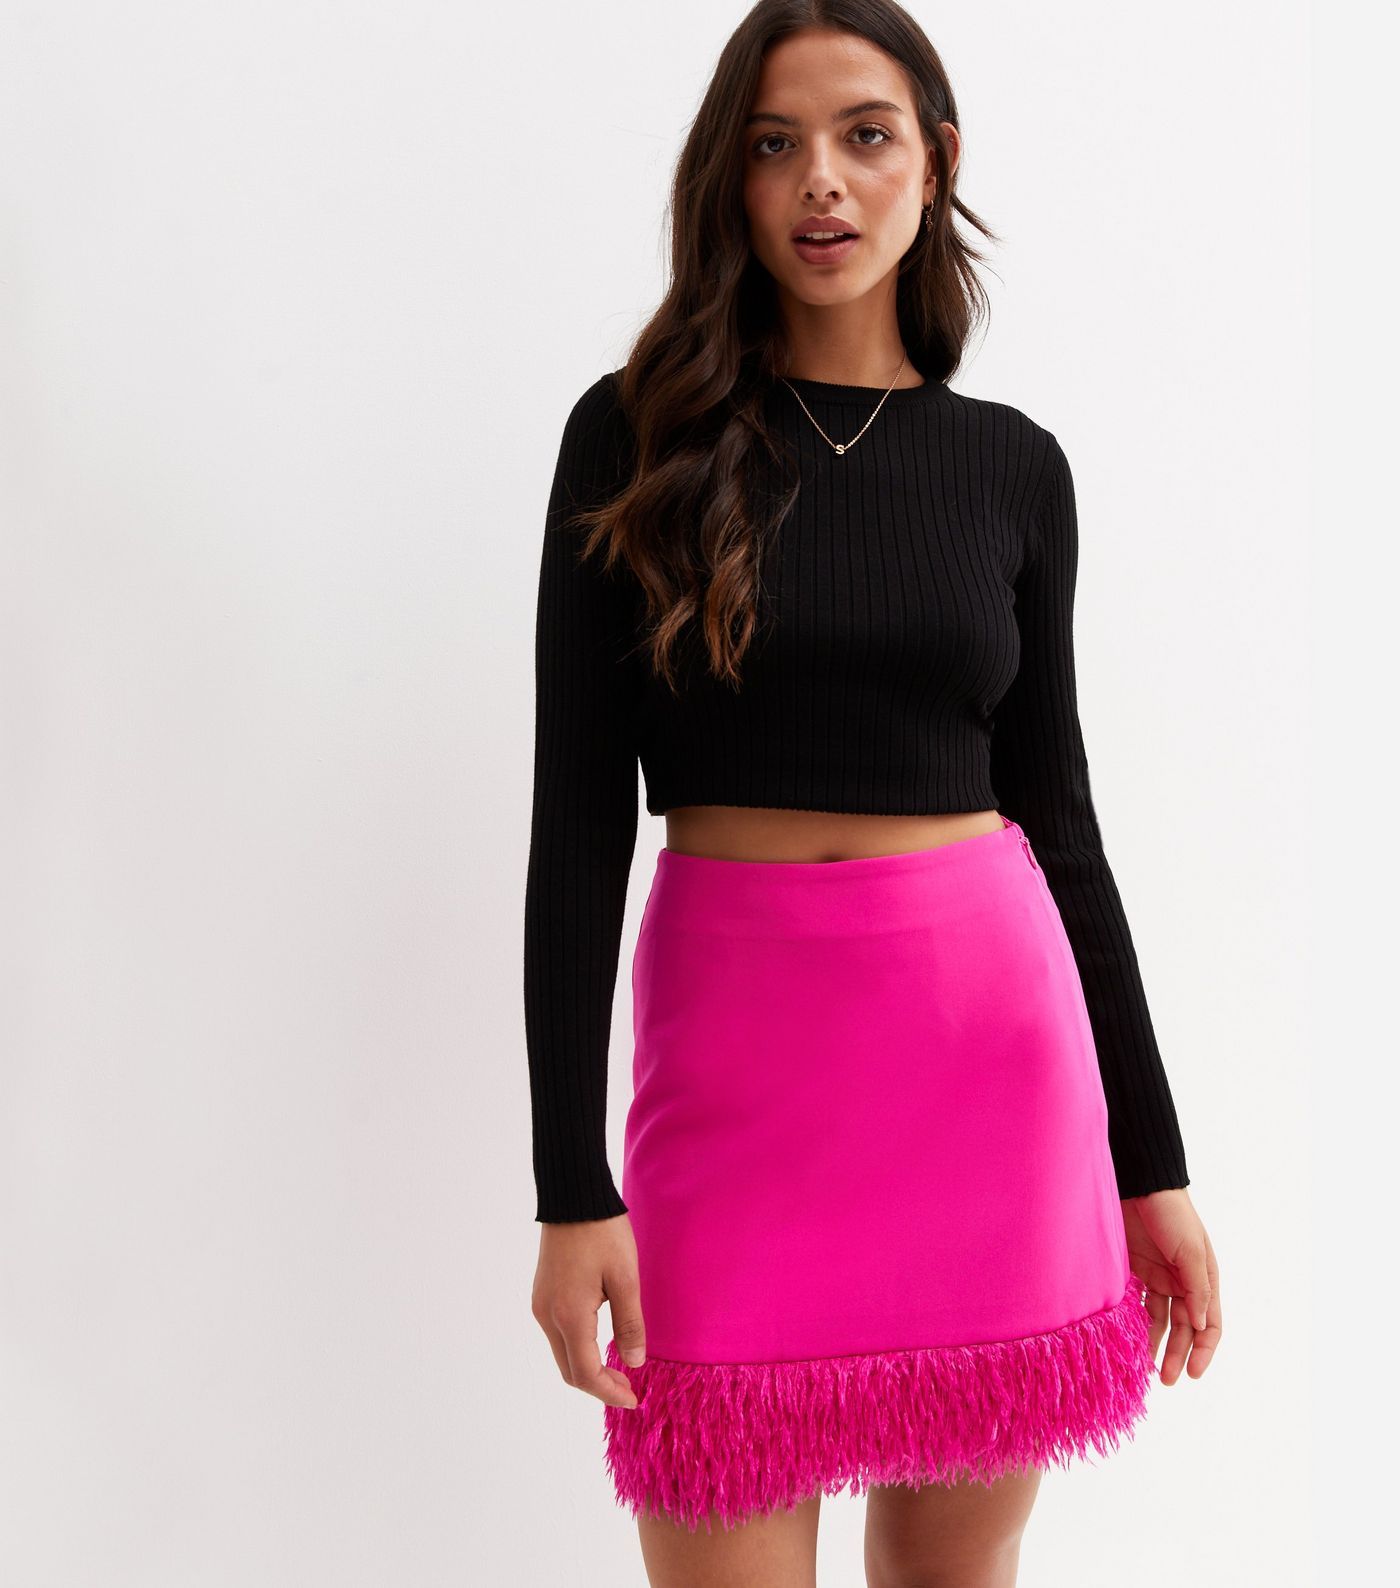 Bright Pink Faux Feather Hem Mini Skirt
						
						Add to Saved Items
						Remove from Saved I... | New Look (UK)